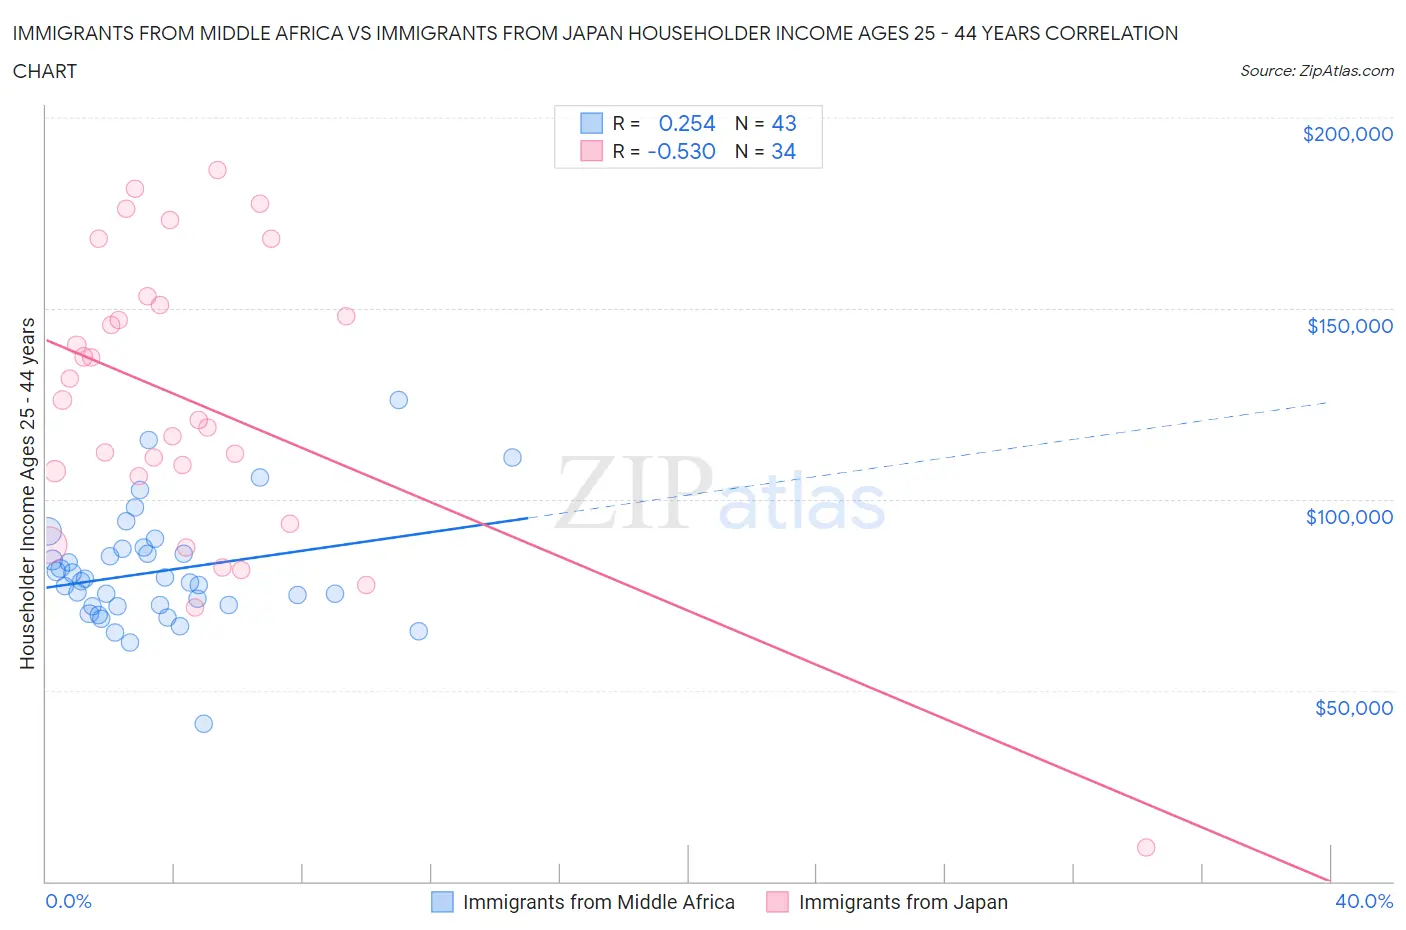 Immigrants from Middle Africa vs Immigrants from Japan Householder Income Ages 25 - 44 years